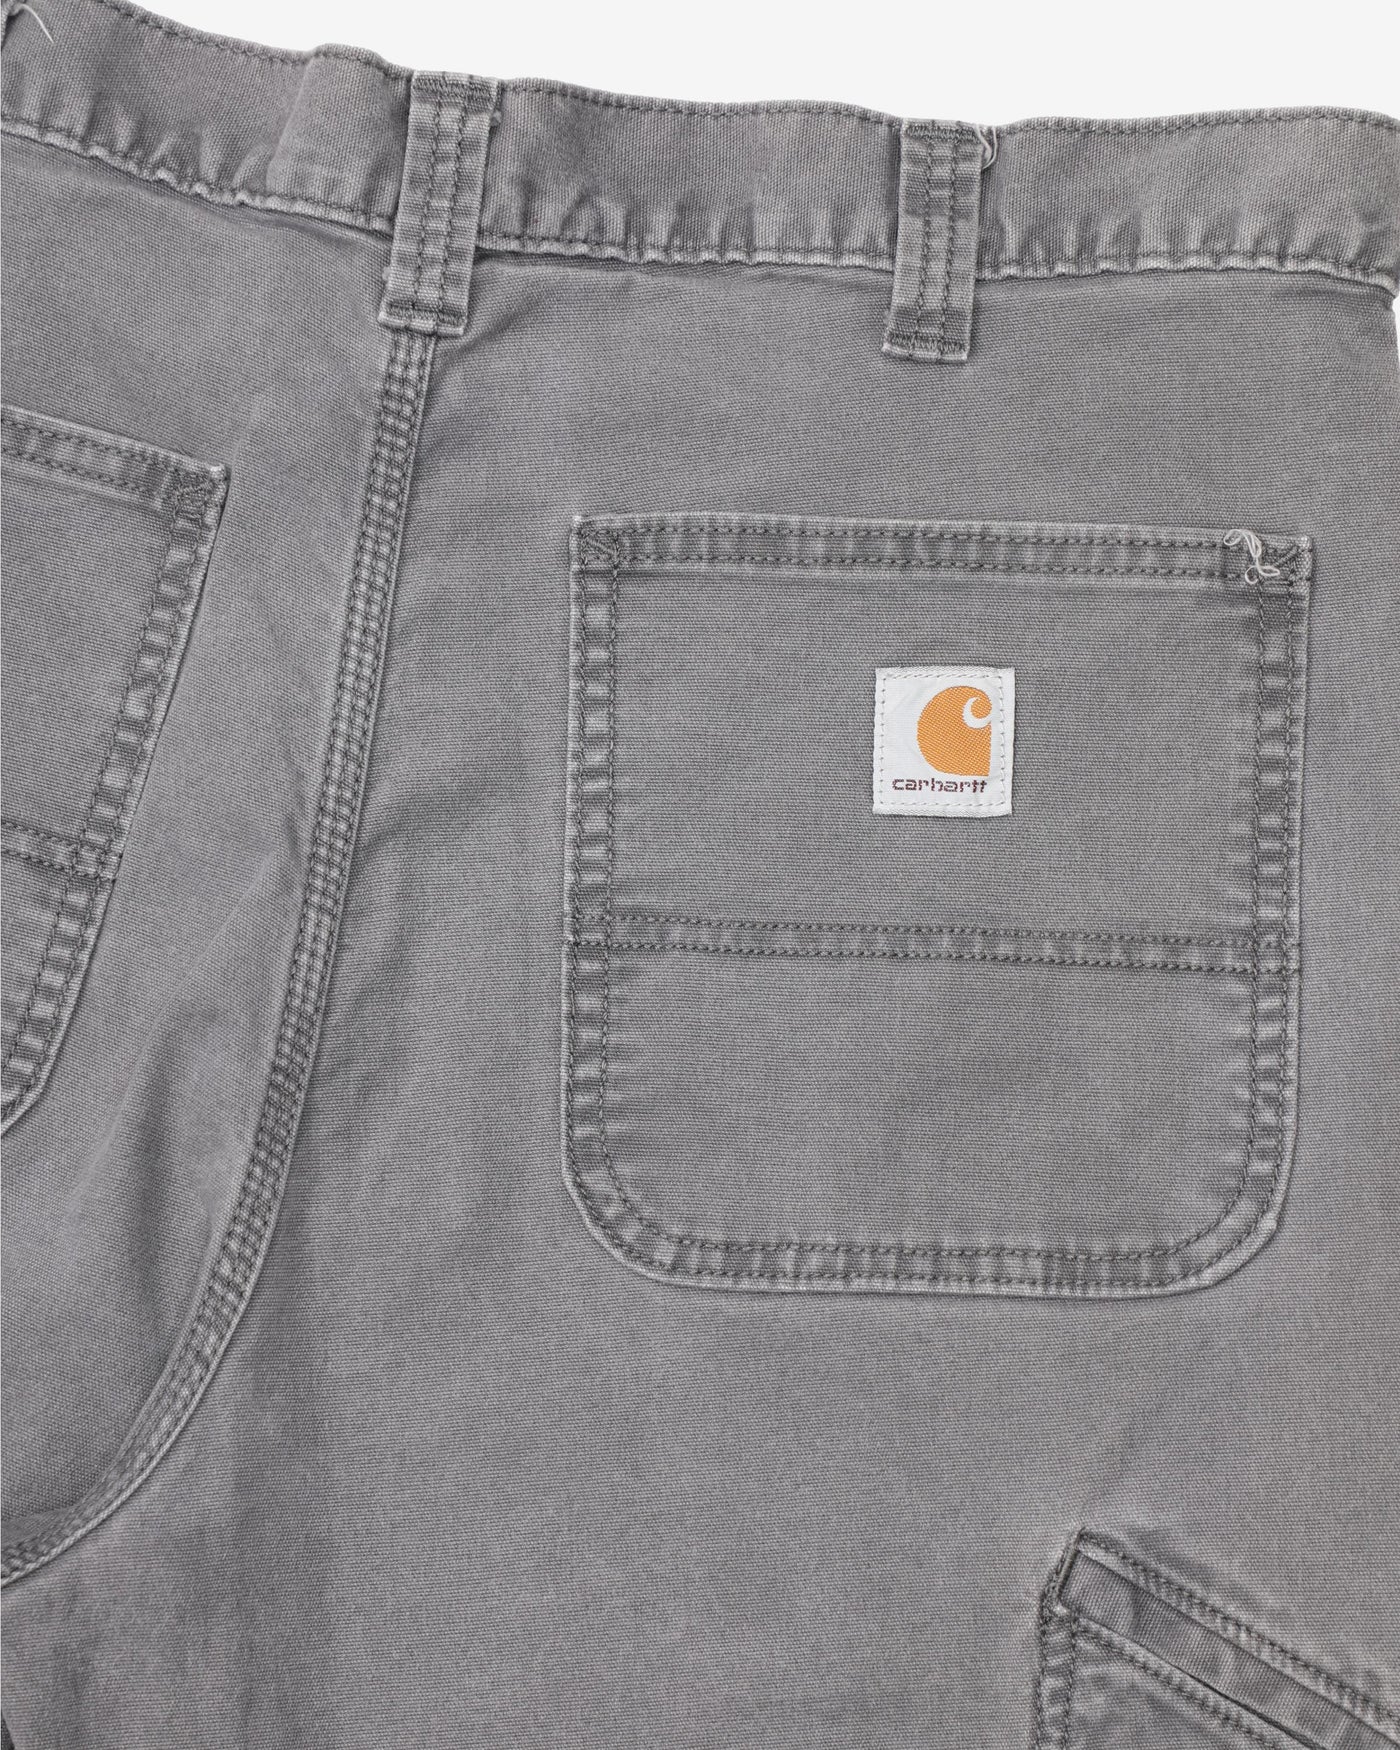 Carhartt Relaxed Fit Grey / Ash Workwear Utility Jeans - W34 L30